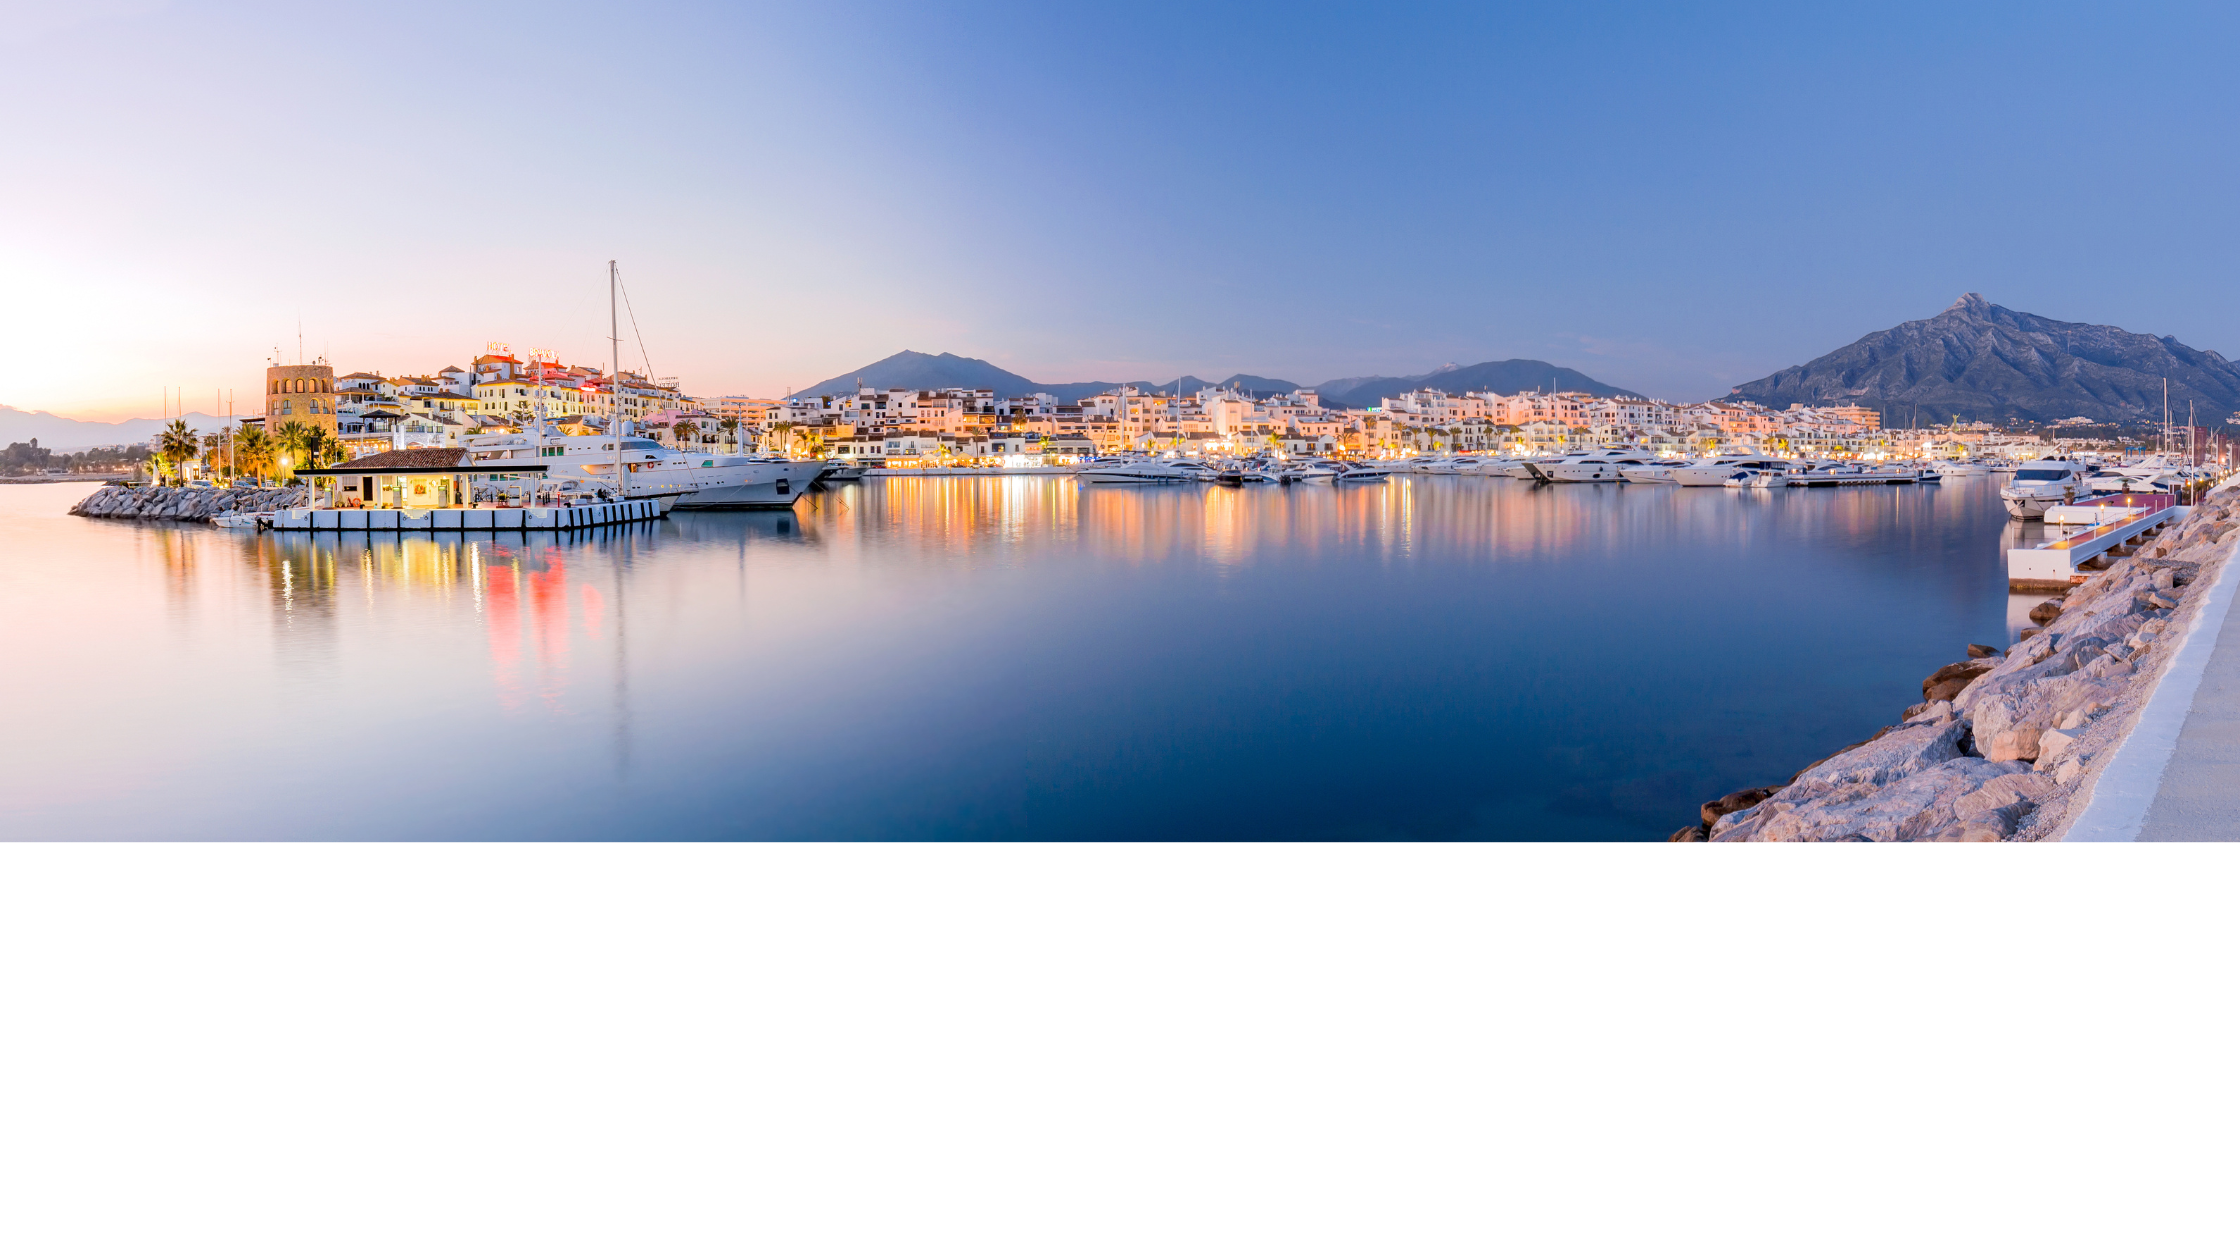 Marbella achieves second place in poll for ‘Best European Destination’